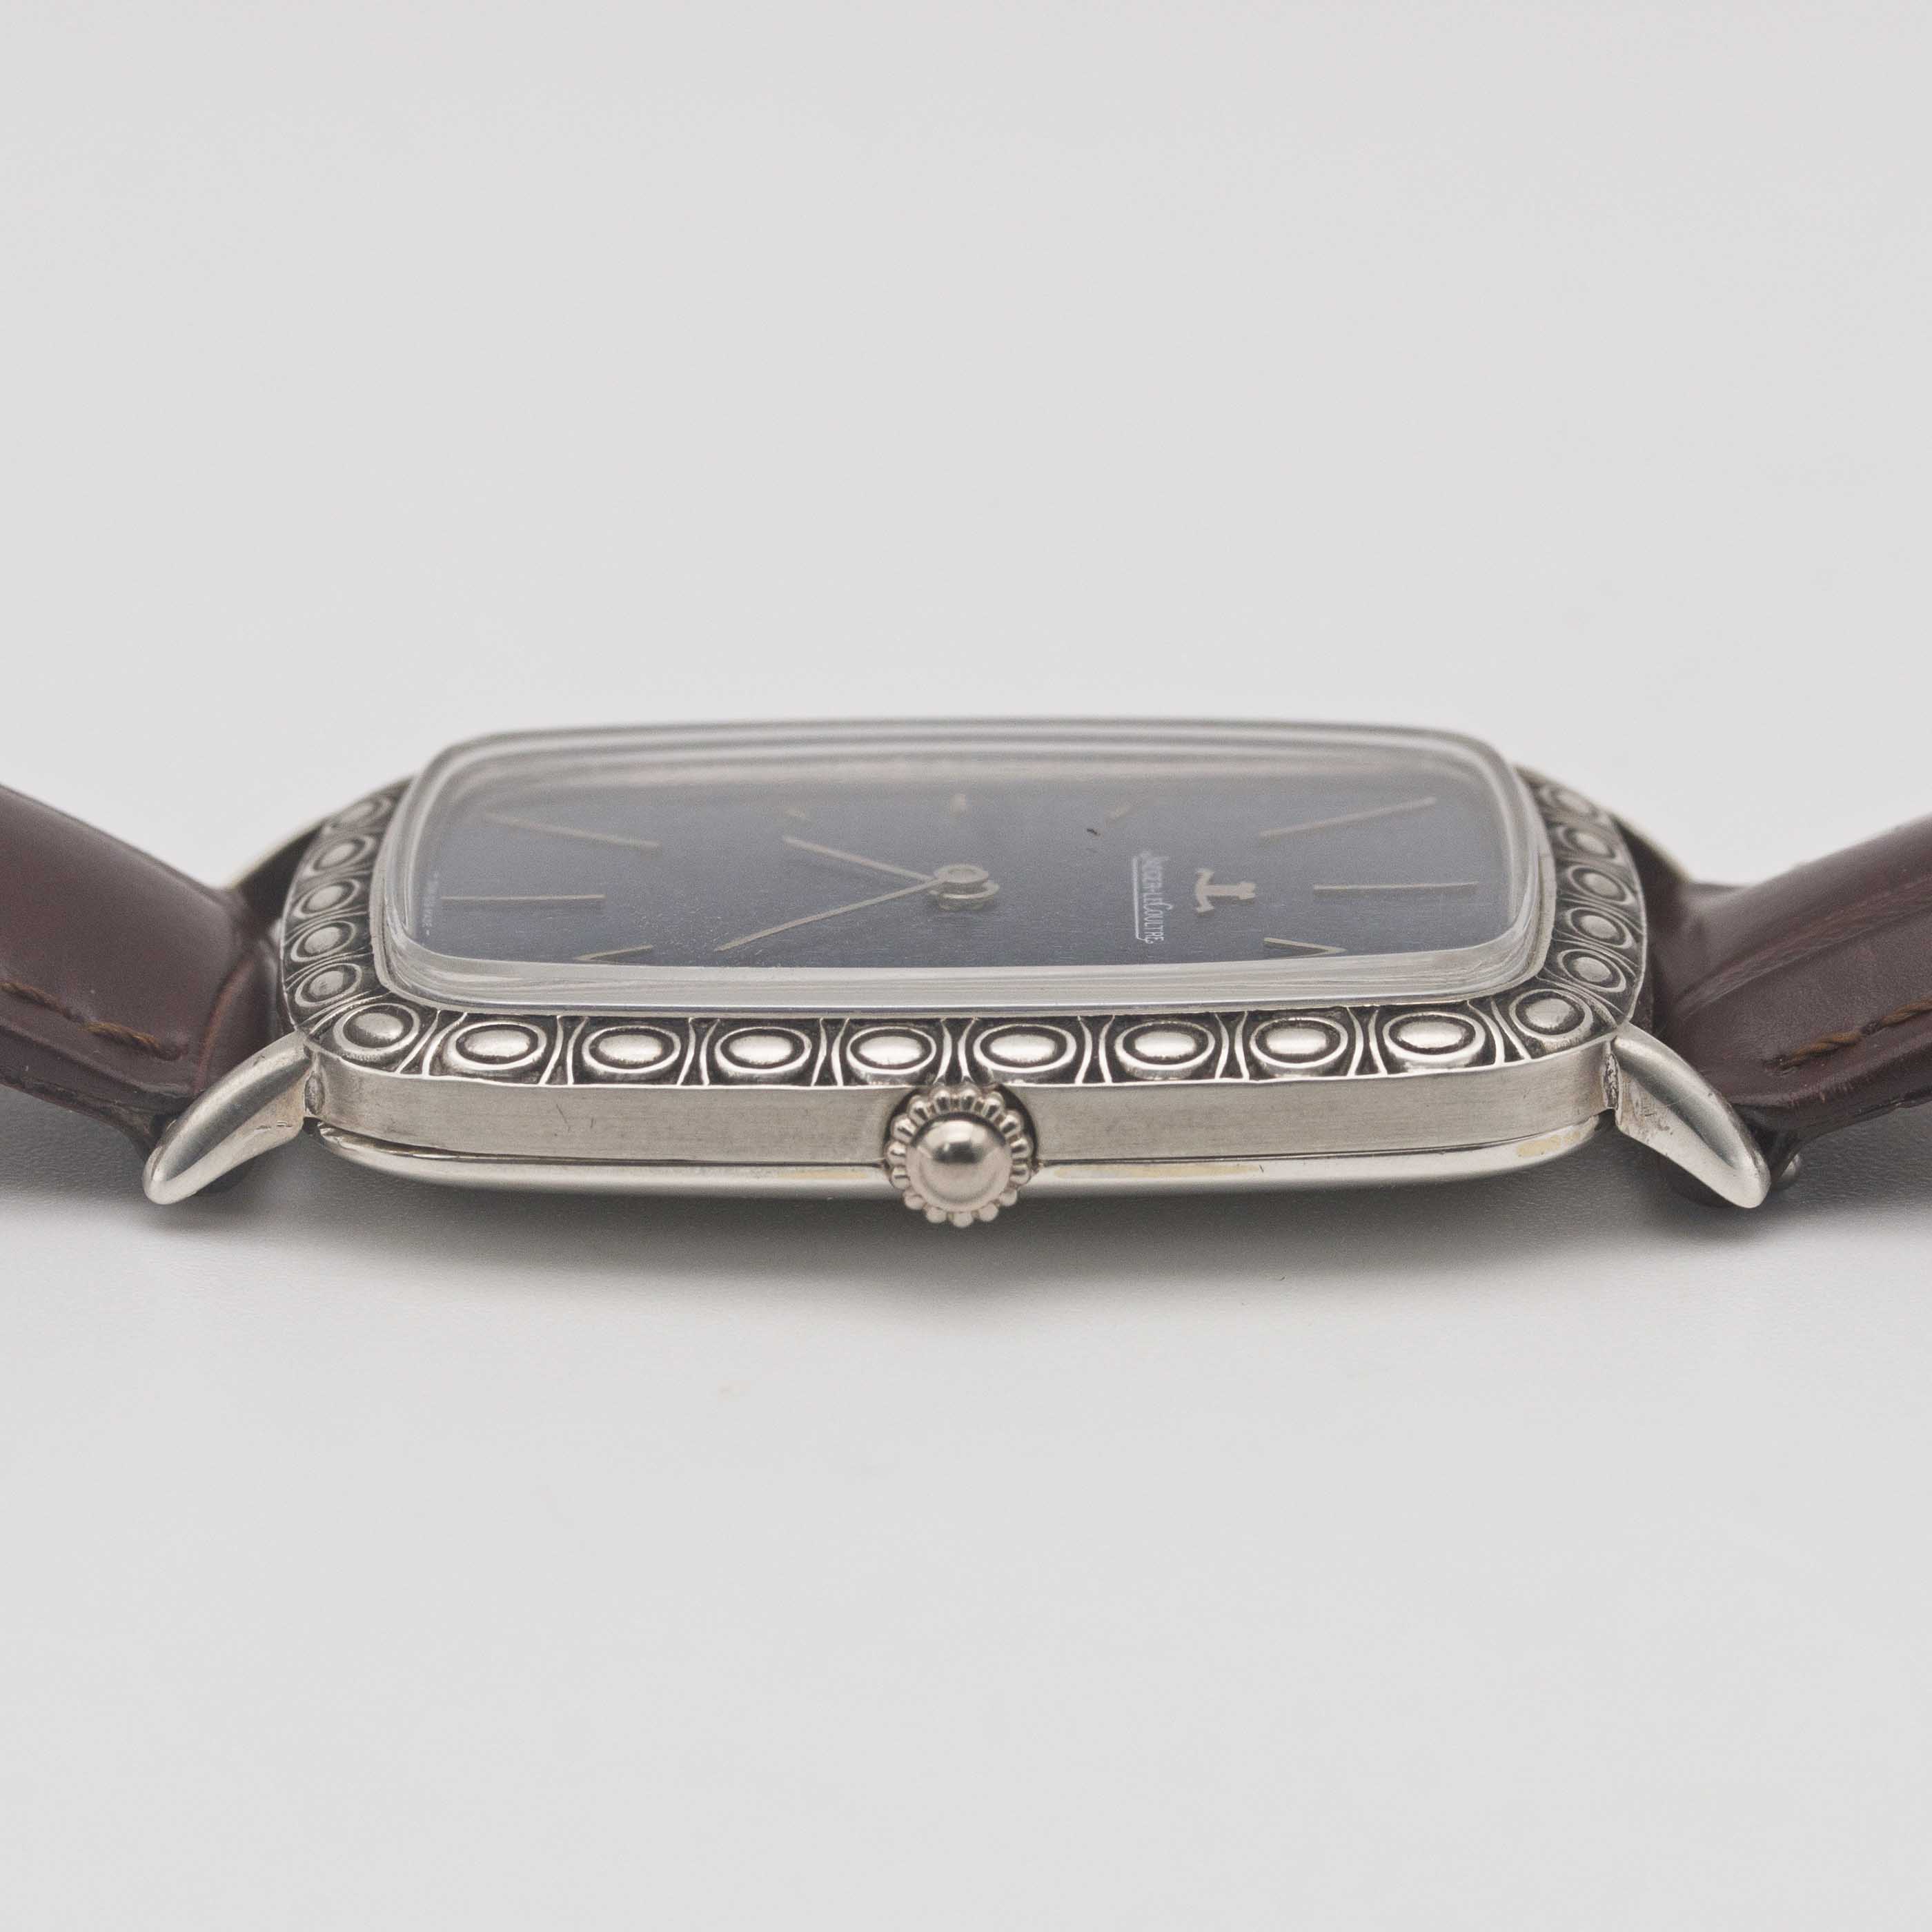 A GENTLEMAN'S SIZE SOLID SILVER JAEGER LECOULTRE RECTANGULAR WRIST WATCH CIRCA 1970s, REF. 9037 WITH - Image 9 of 10